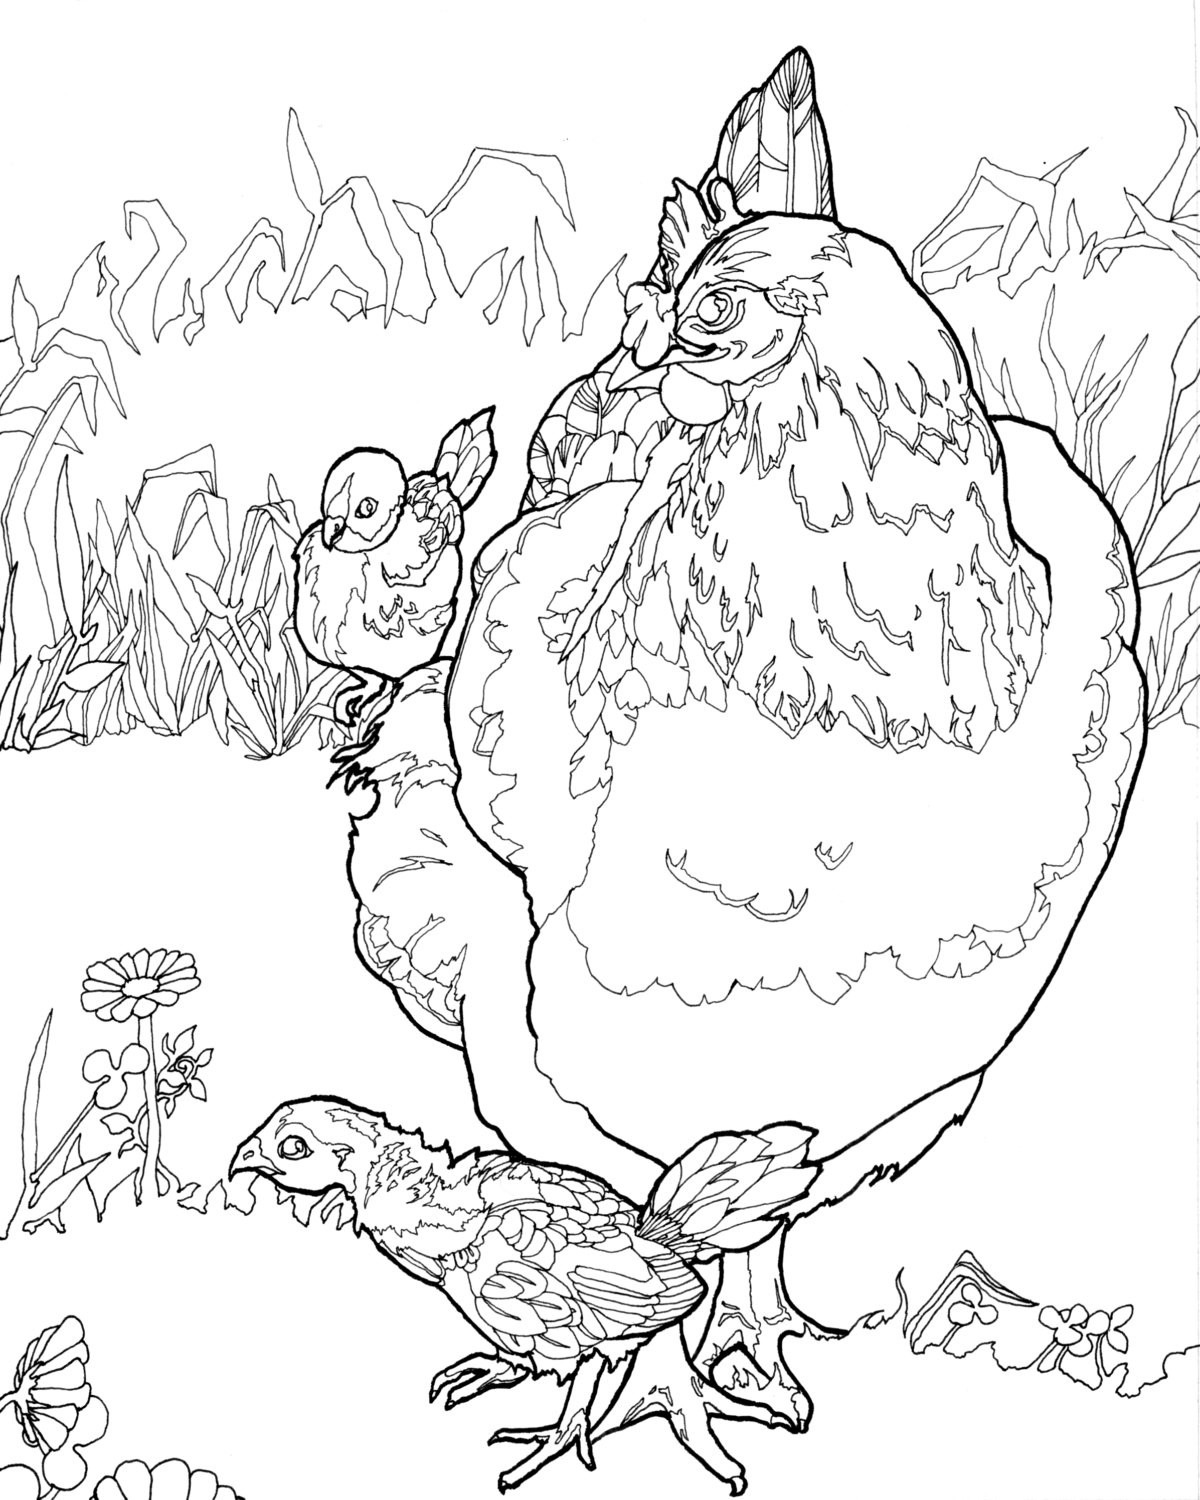 Chicken Coloring Pages For Adults
 DIGITAL DOWNLOAD Chicken Coloring Pages Adult Coloring Pages